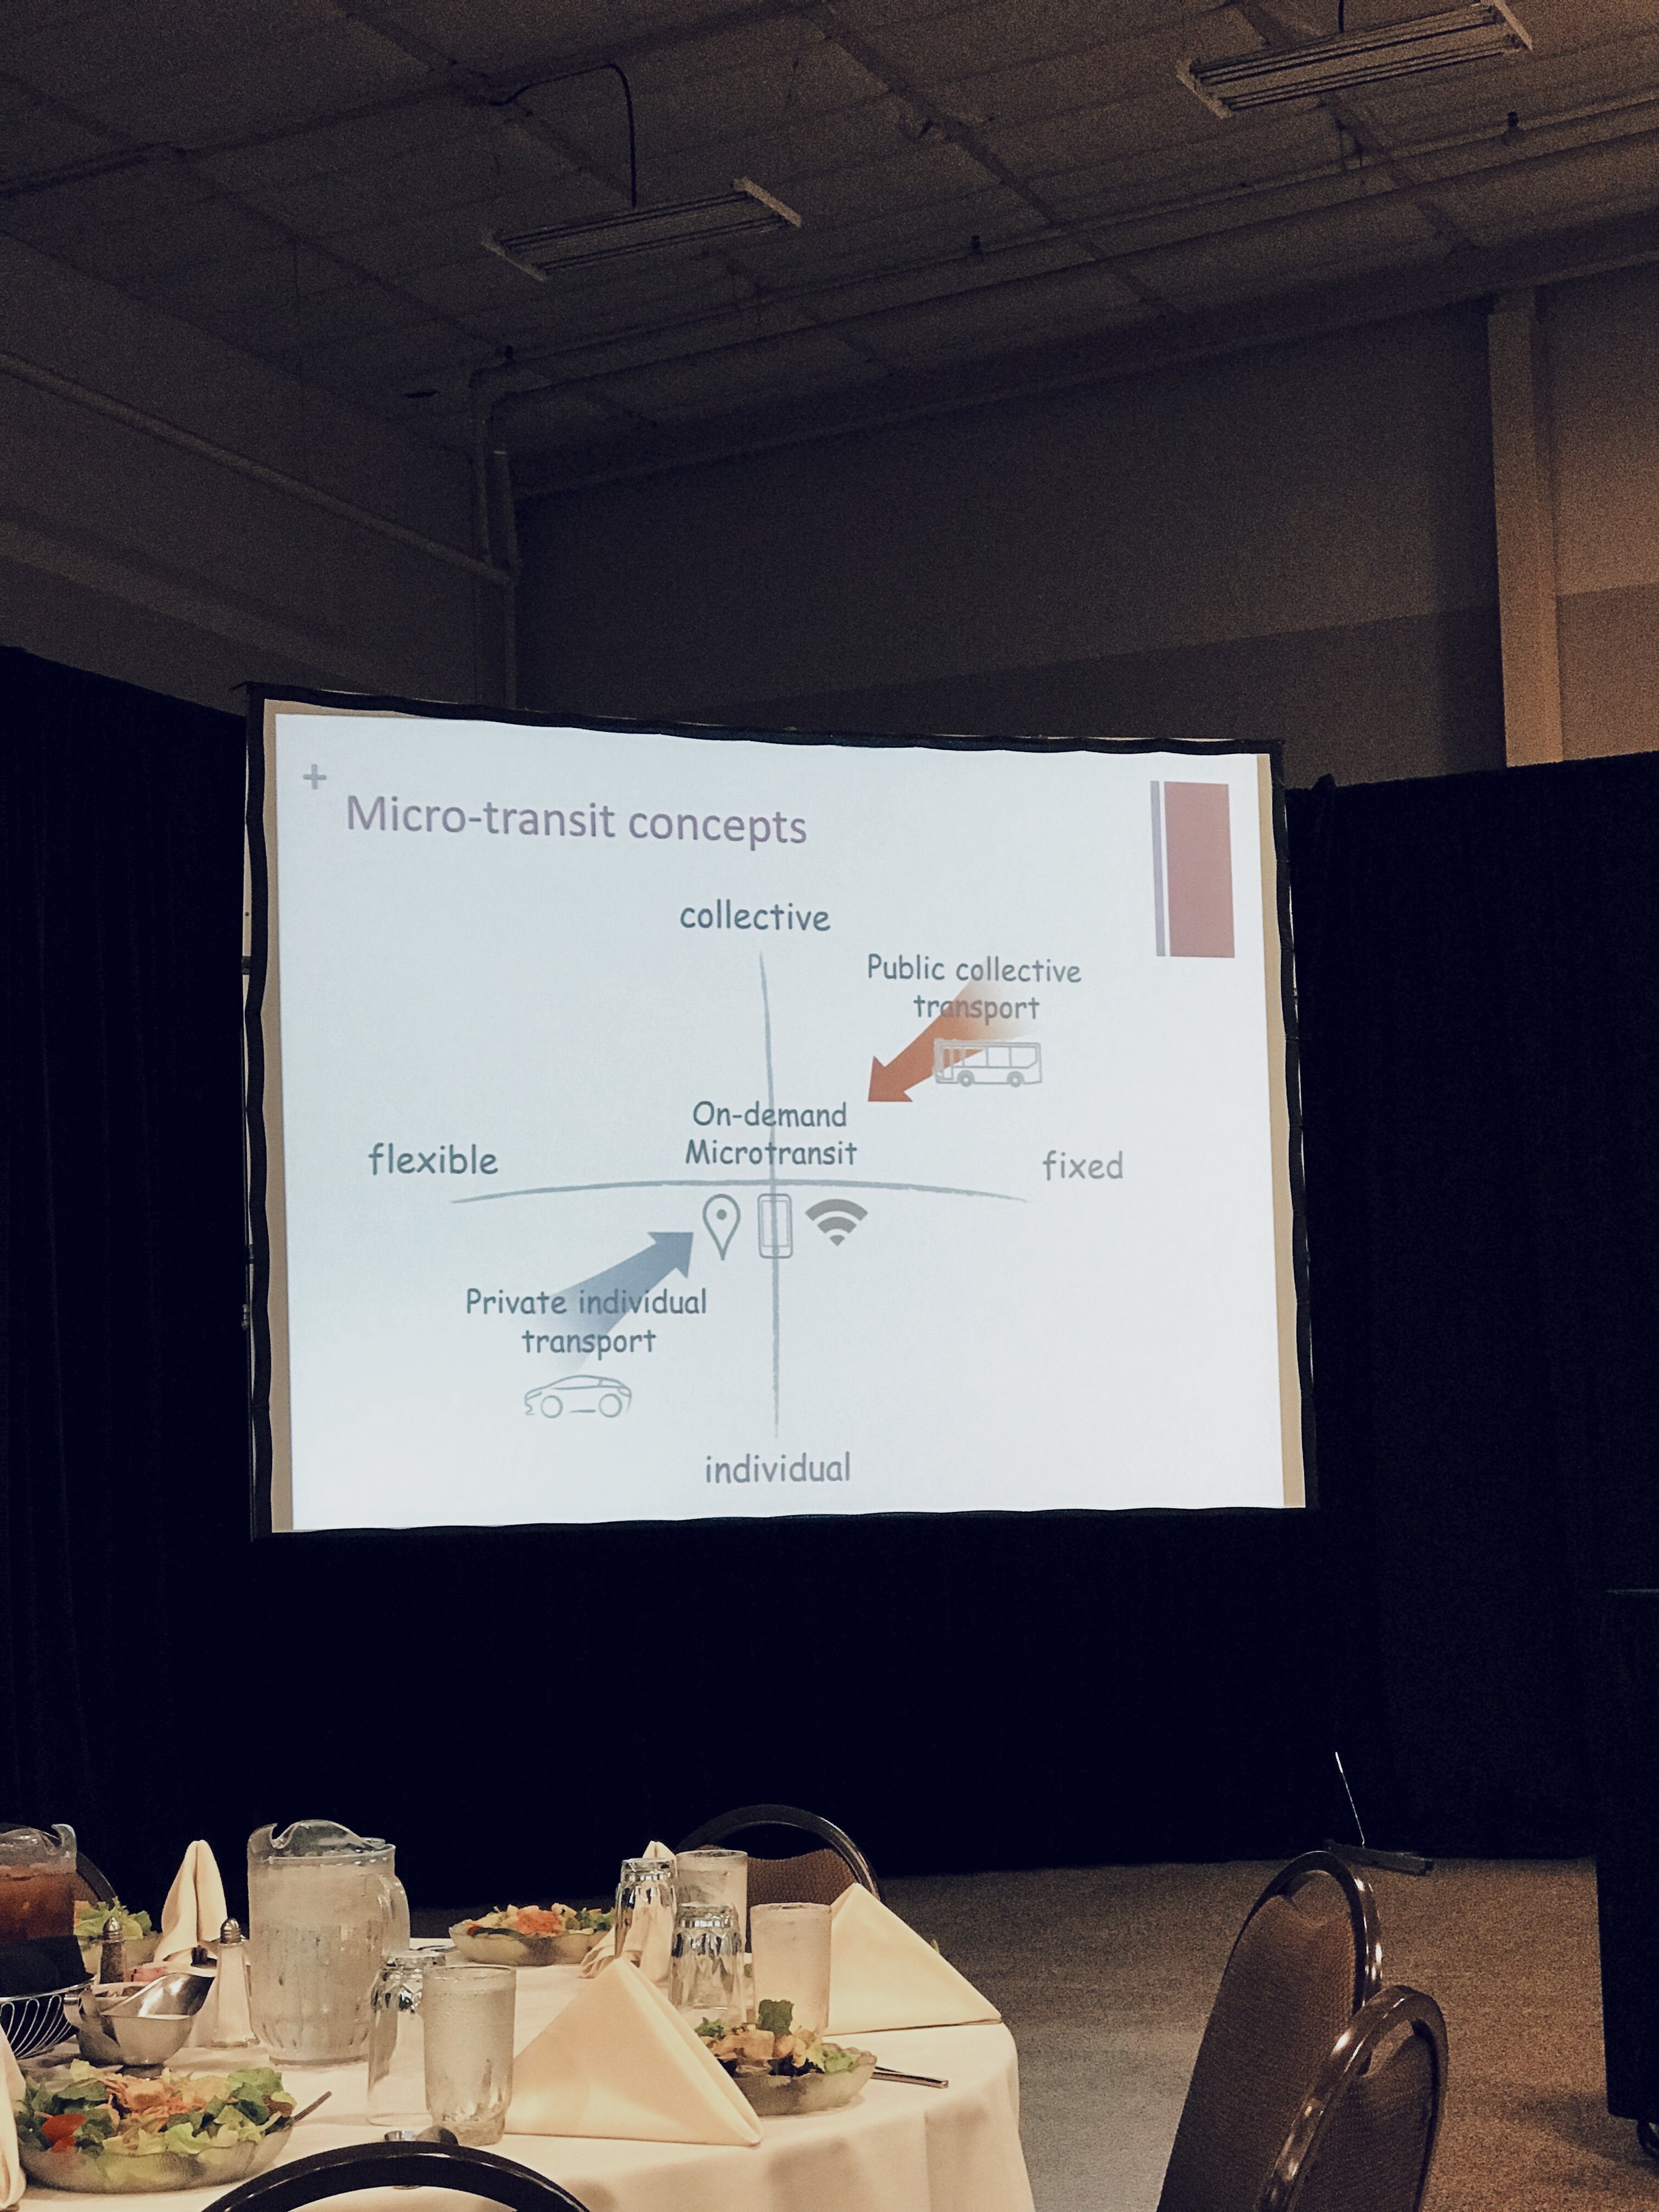 Really enjoyed learning more about micro-transit and its implications for paratransit!